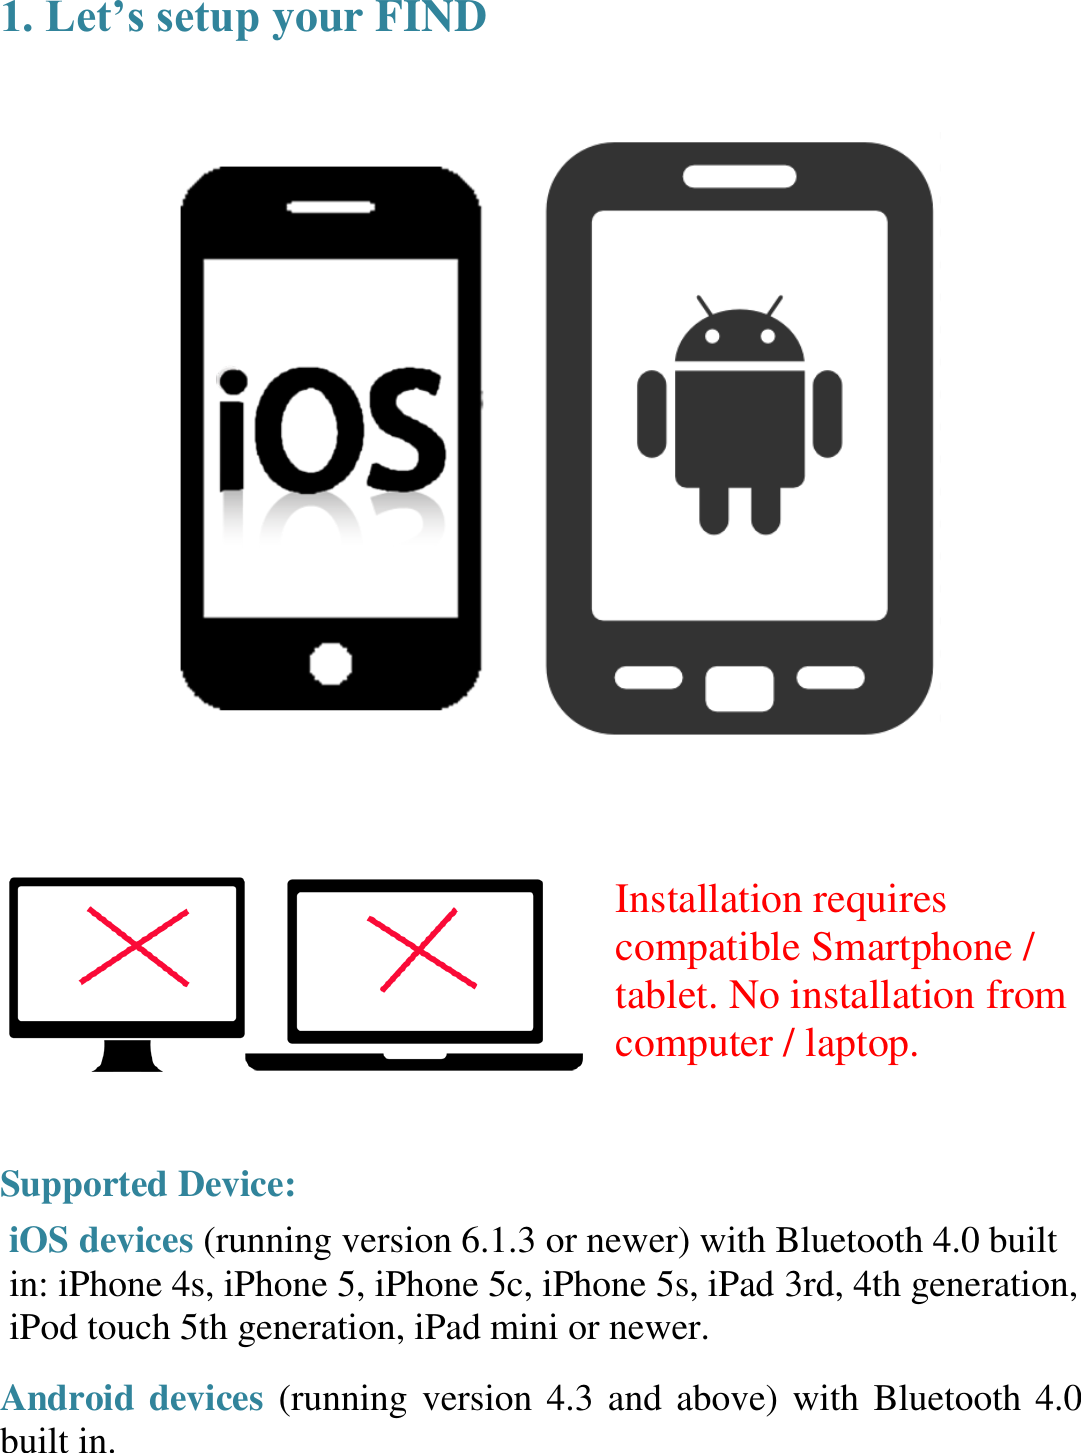 1. Let’s setup your FIND      Installation requires compatible Smartphone / tablet. No installation from computer / laptop.   Supported Device:  iOS devices (running version 6.1.3 or newer) with Bluetooth 4.0 built in: iPhone 4s, iPhone 5, iPhone 5c, iPhone 5s, iPad 3rd, 4th generation, iPod touch 5th generation, iPad mini or newer.  Android devices (running version 4.3 and above) with Bluetooth 4.0 built in.  